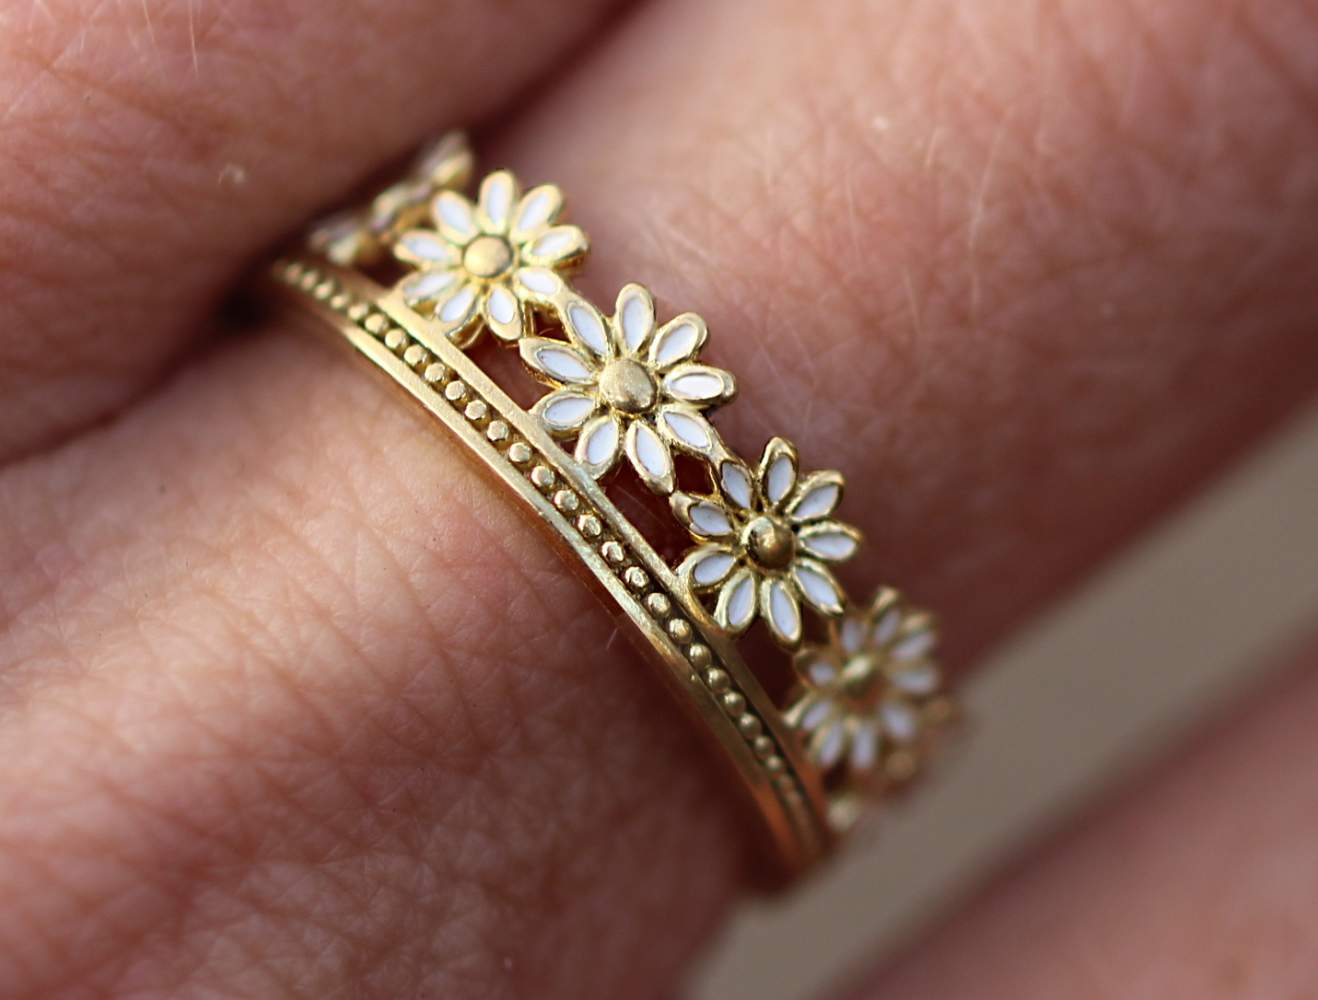 Daisy Ring. Gold over sterling and white enamel. Dainty adjustable flower ring